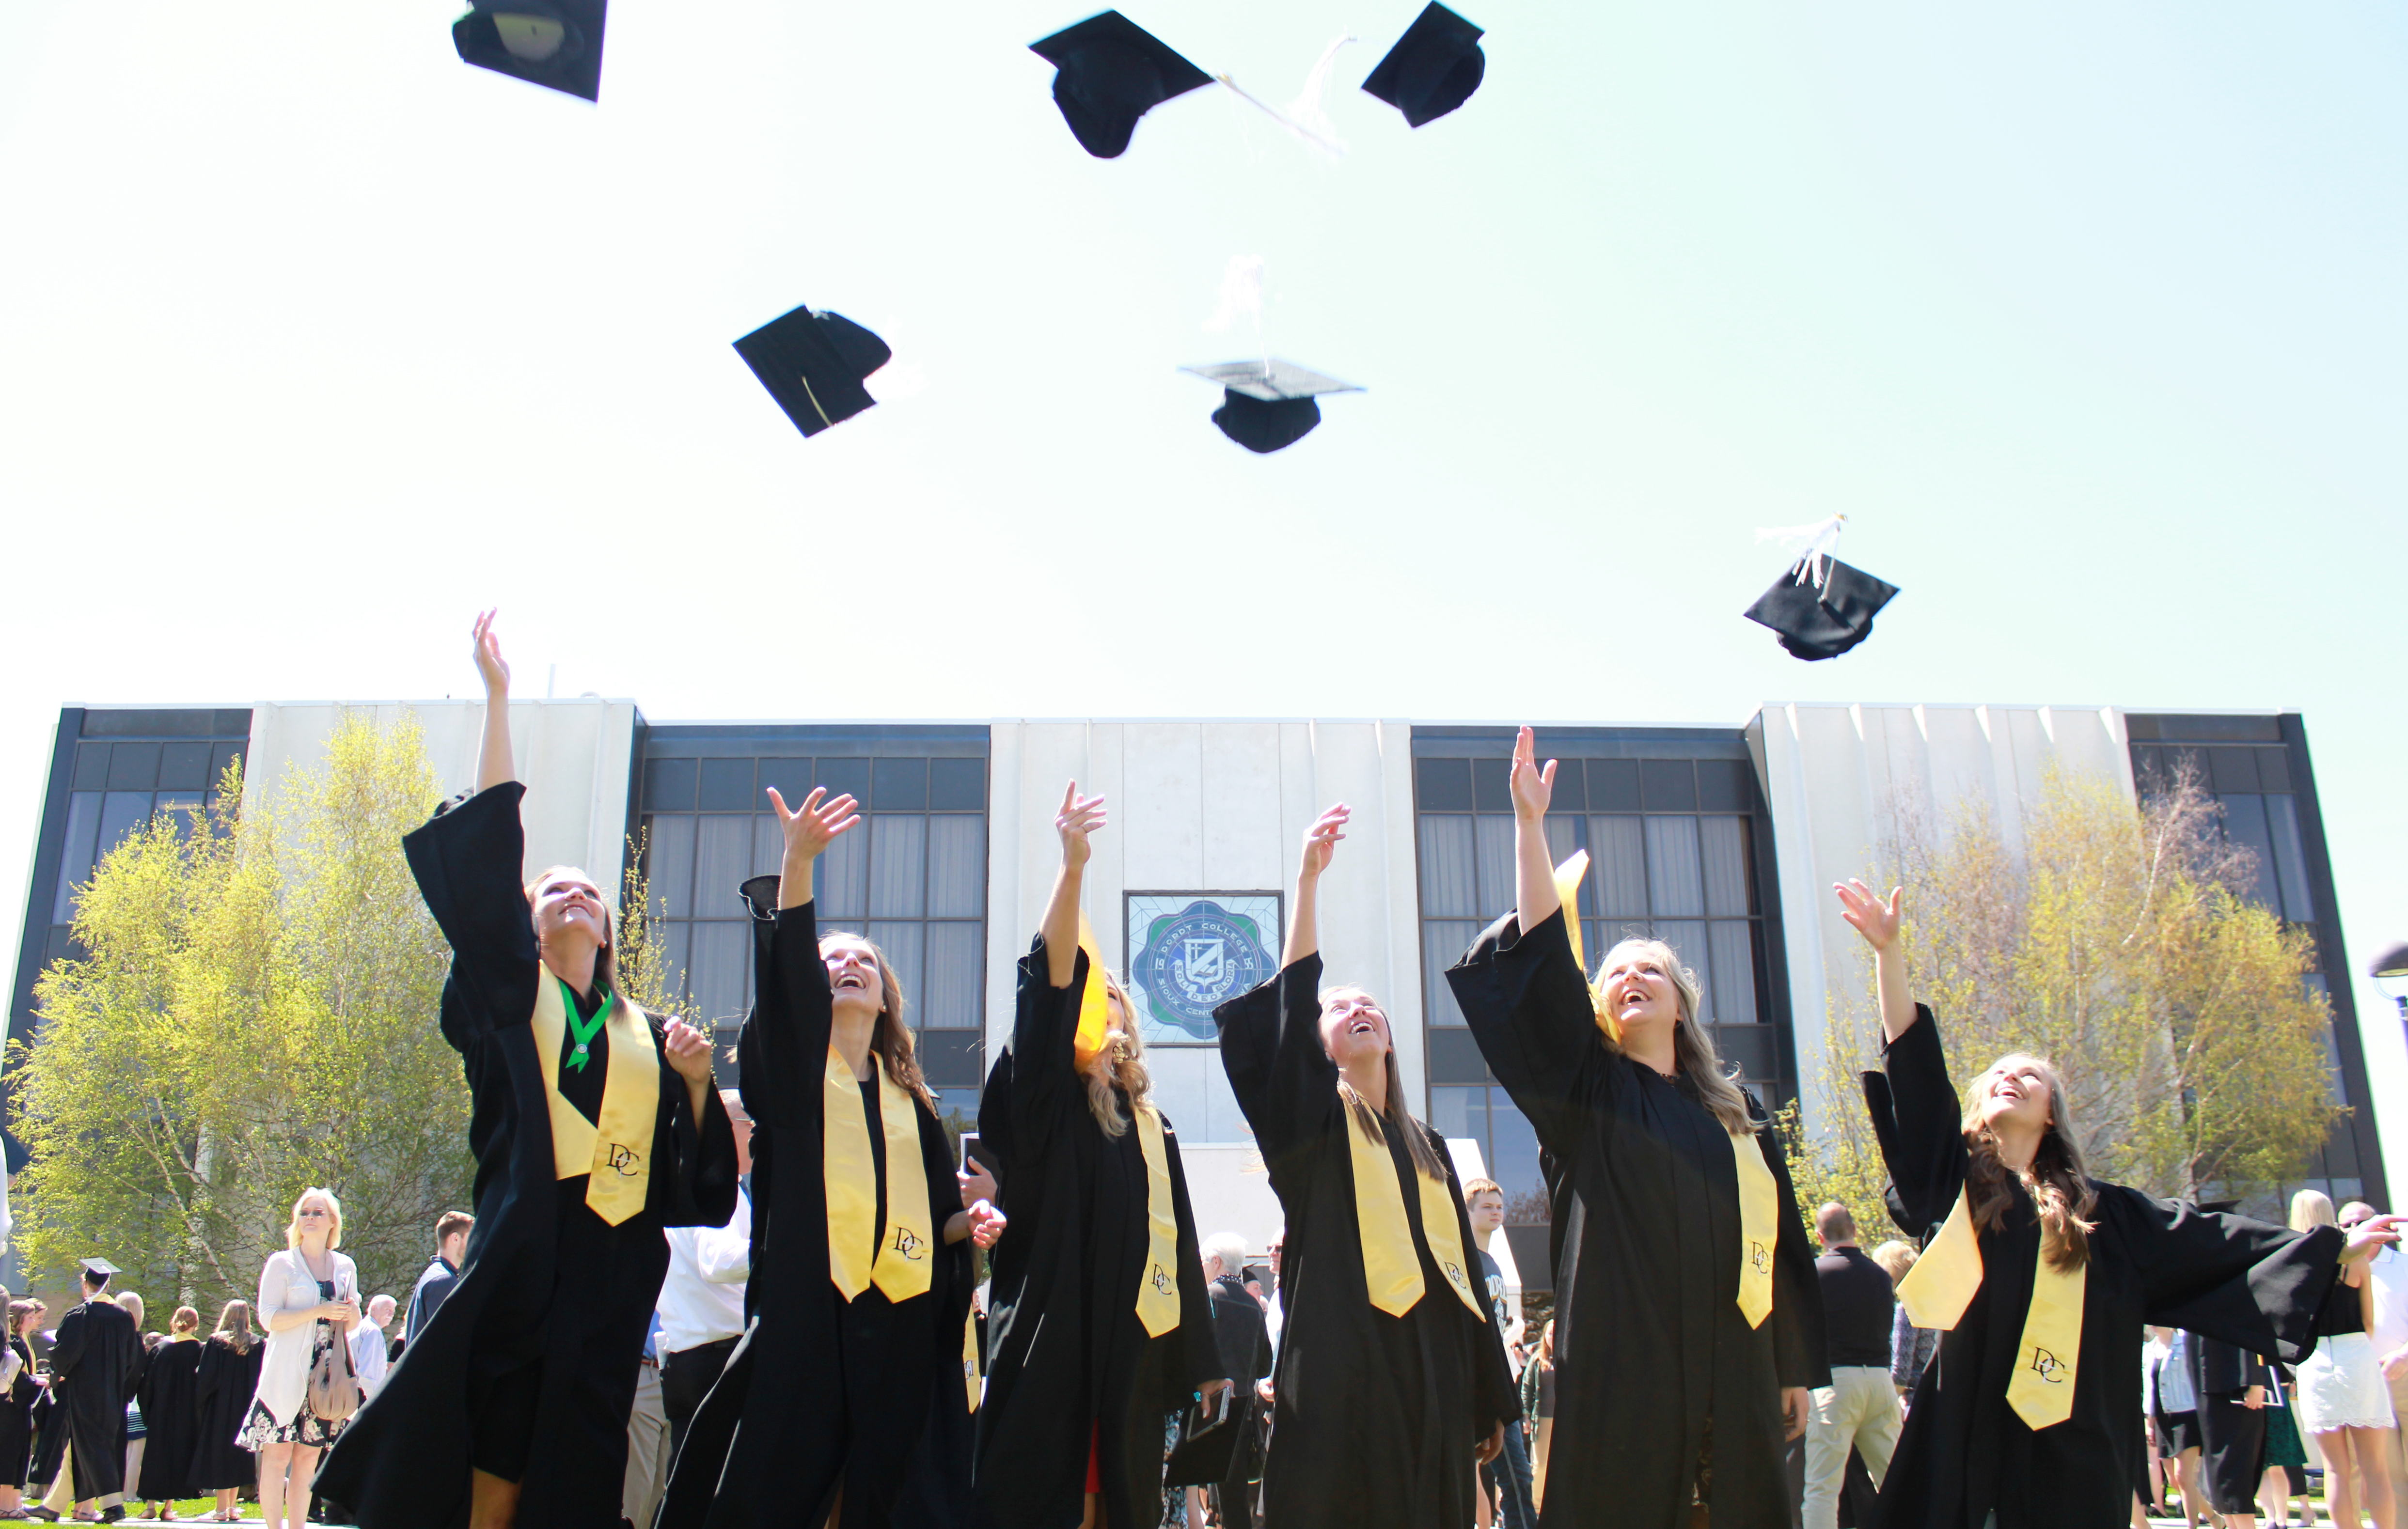 A picture of graduates in robes throwing their graduation caps in the air